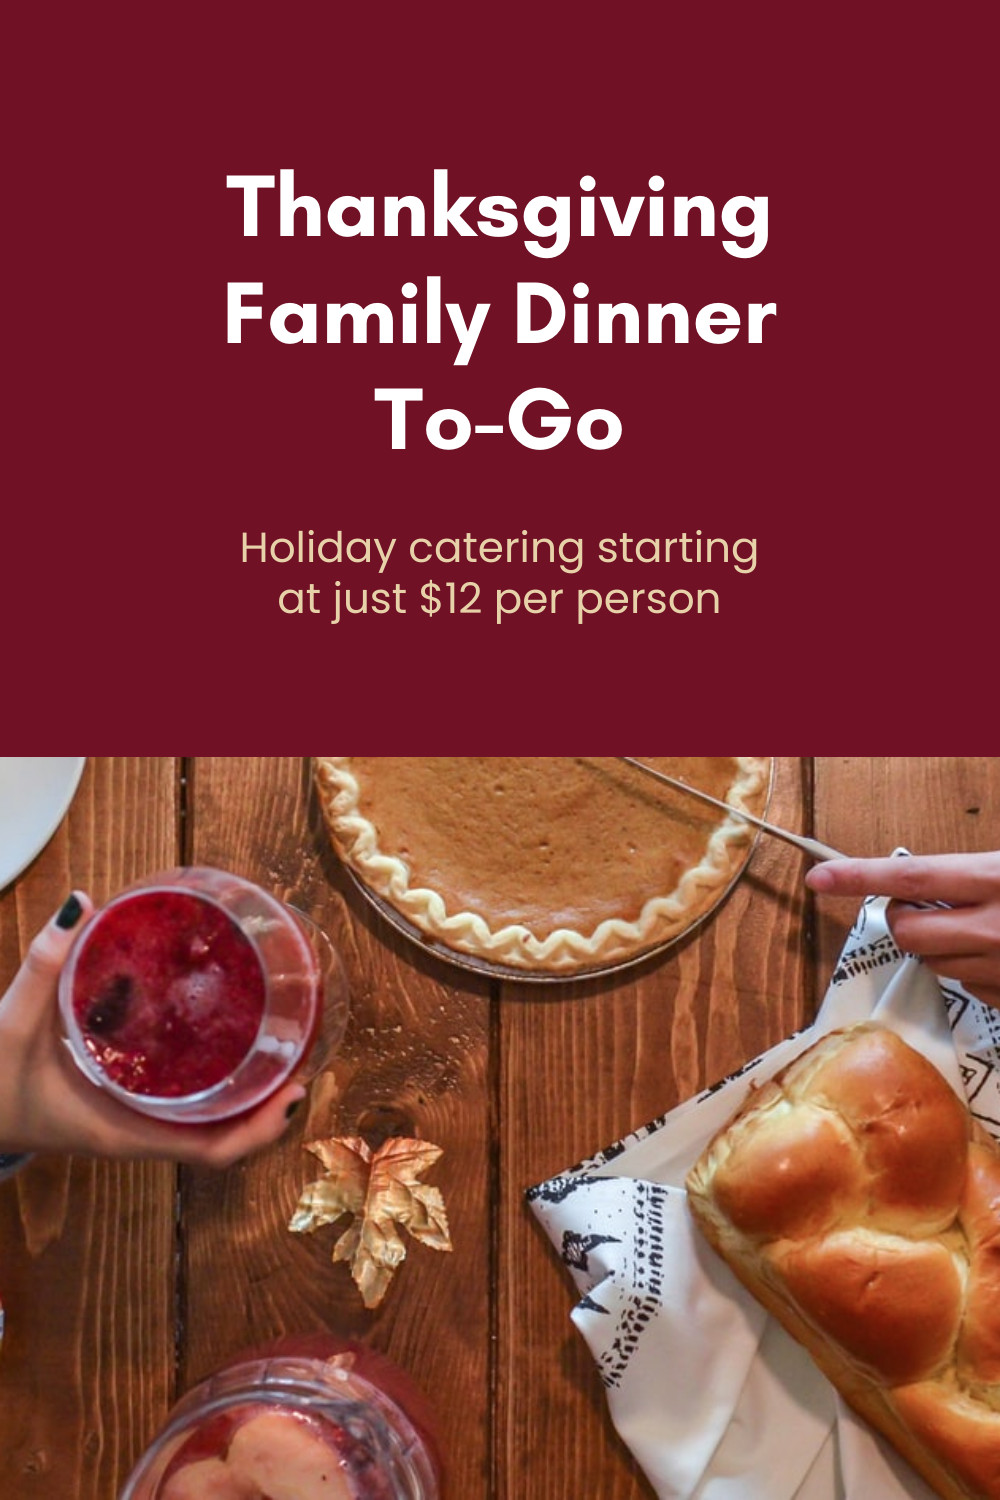 Thanksgiving Family Dinner To Go  Inline Rectangle 300x250